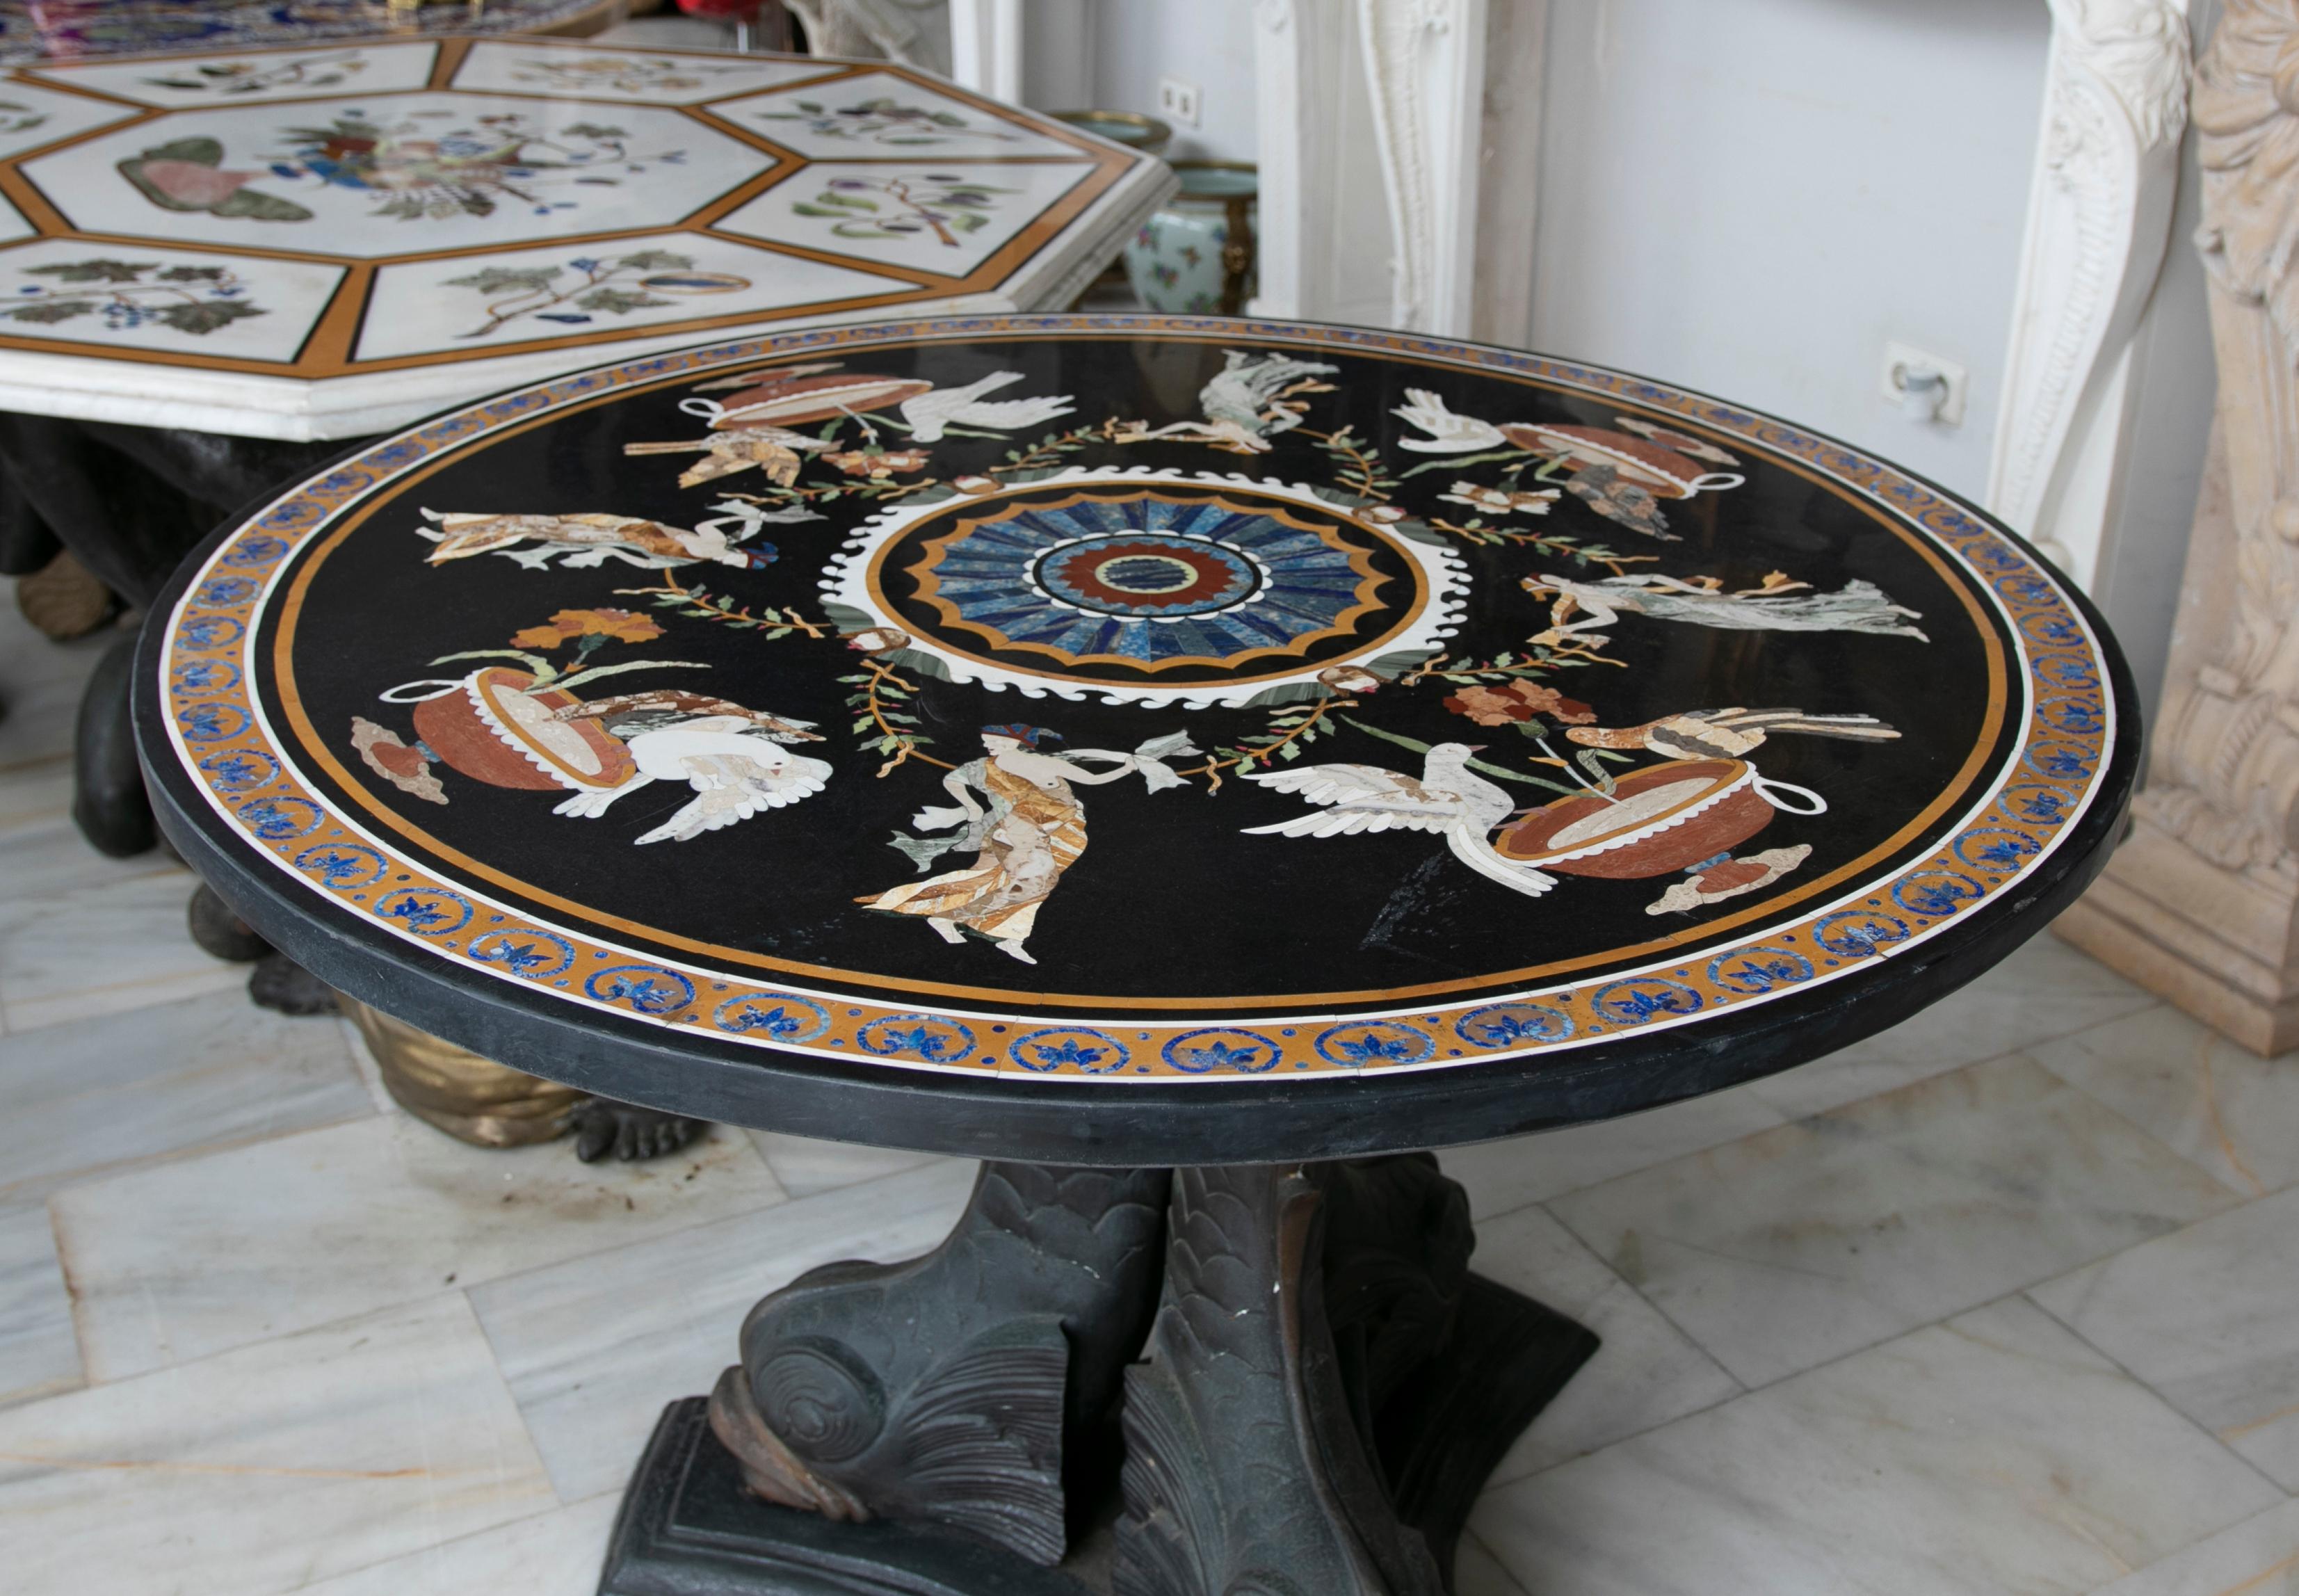 Circular marble table inlaid with hard stones of Greek Scenes.